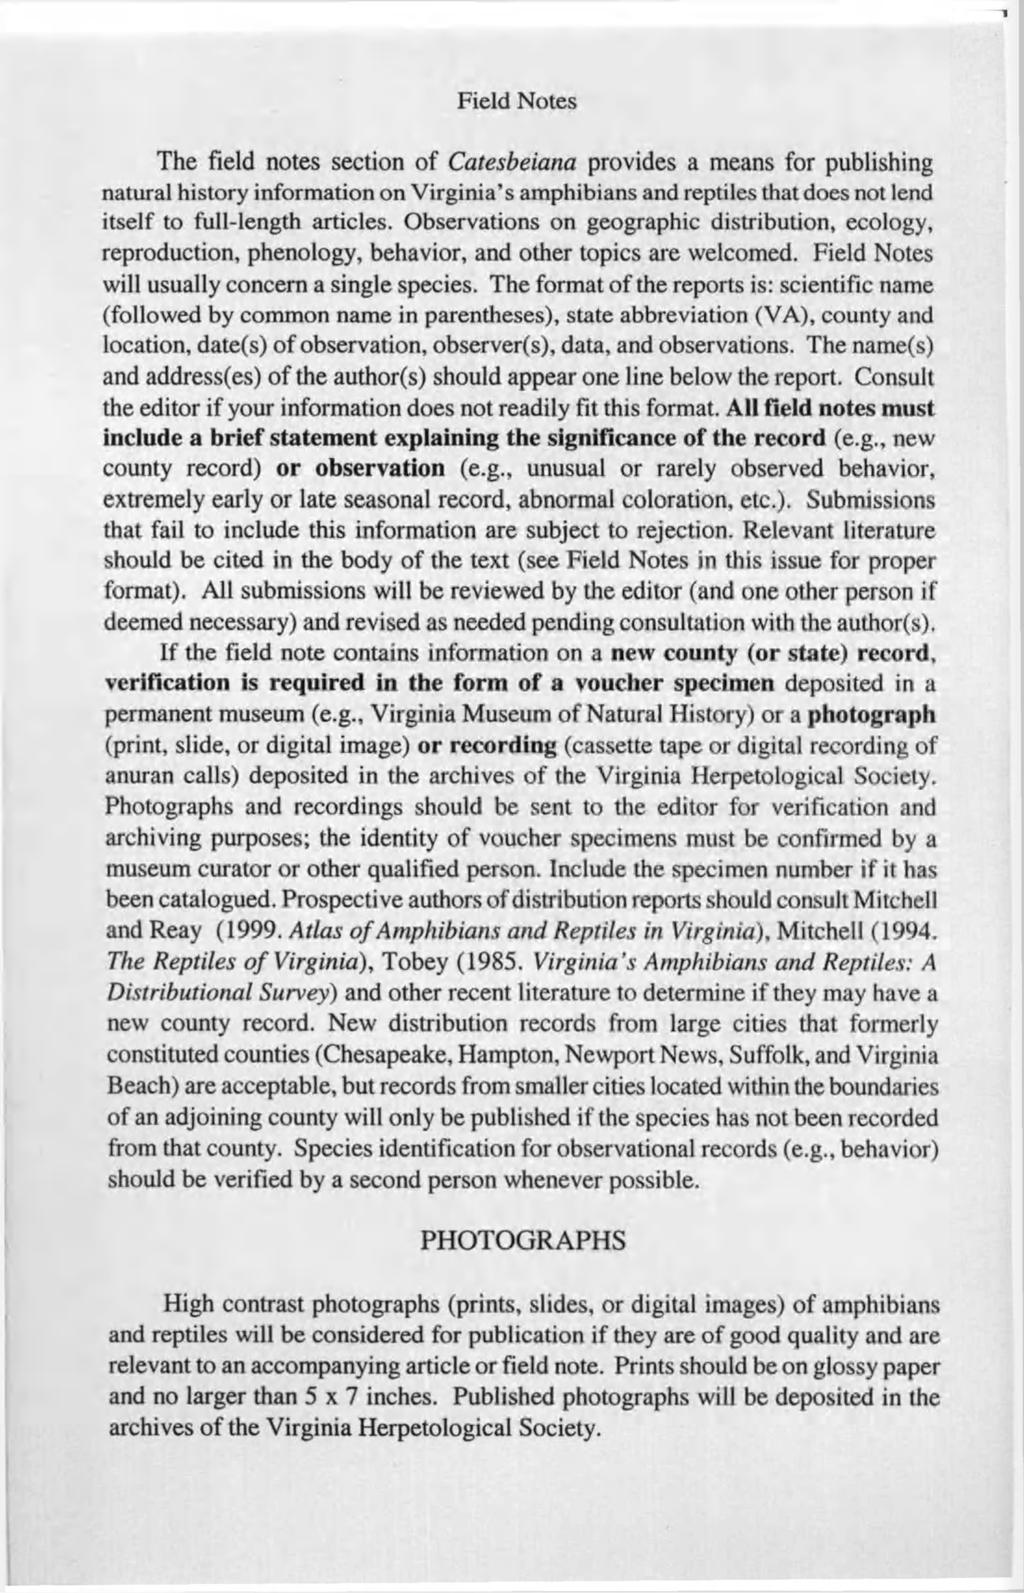 Field Notes The field notes section of Catesbeiana provides a means for publishing natural history information on Virginia s amphibians and reptiles that does not lend itself to full-length articles.